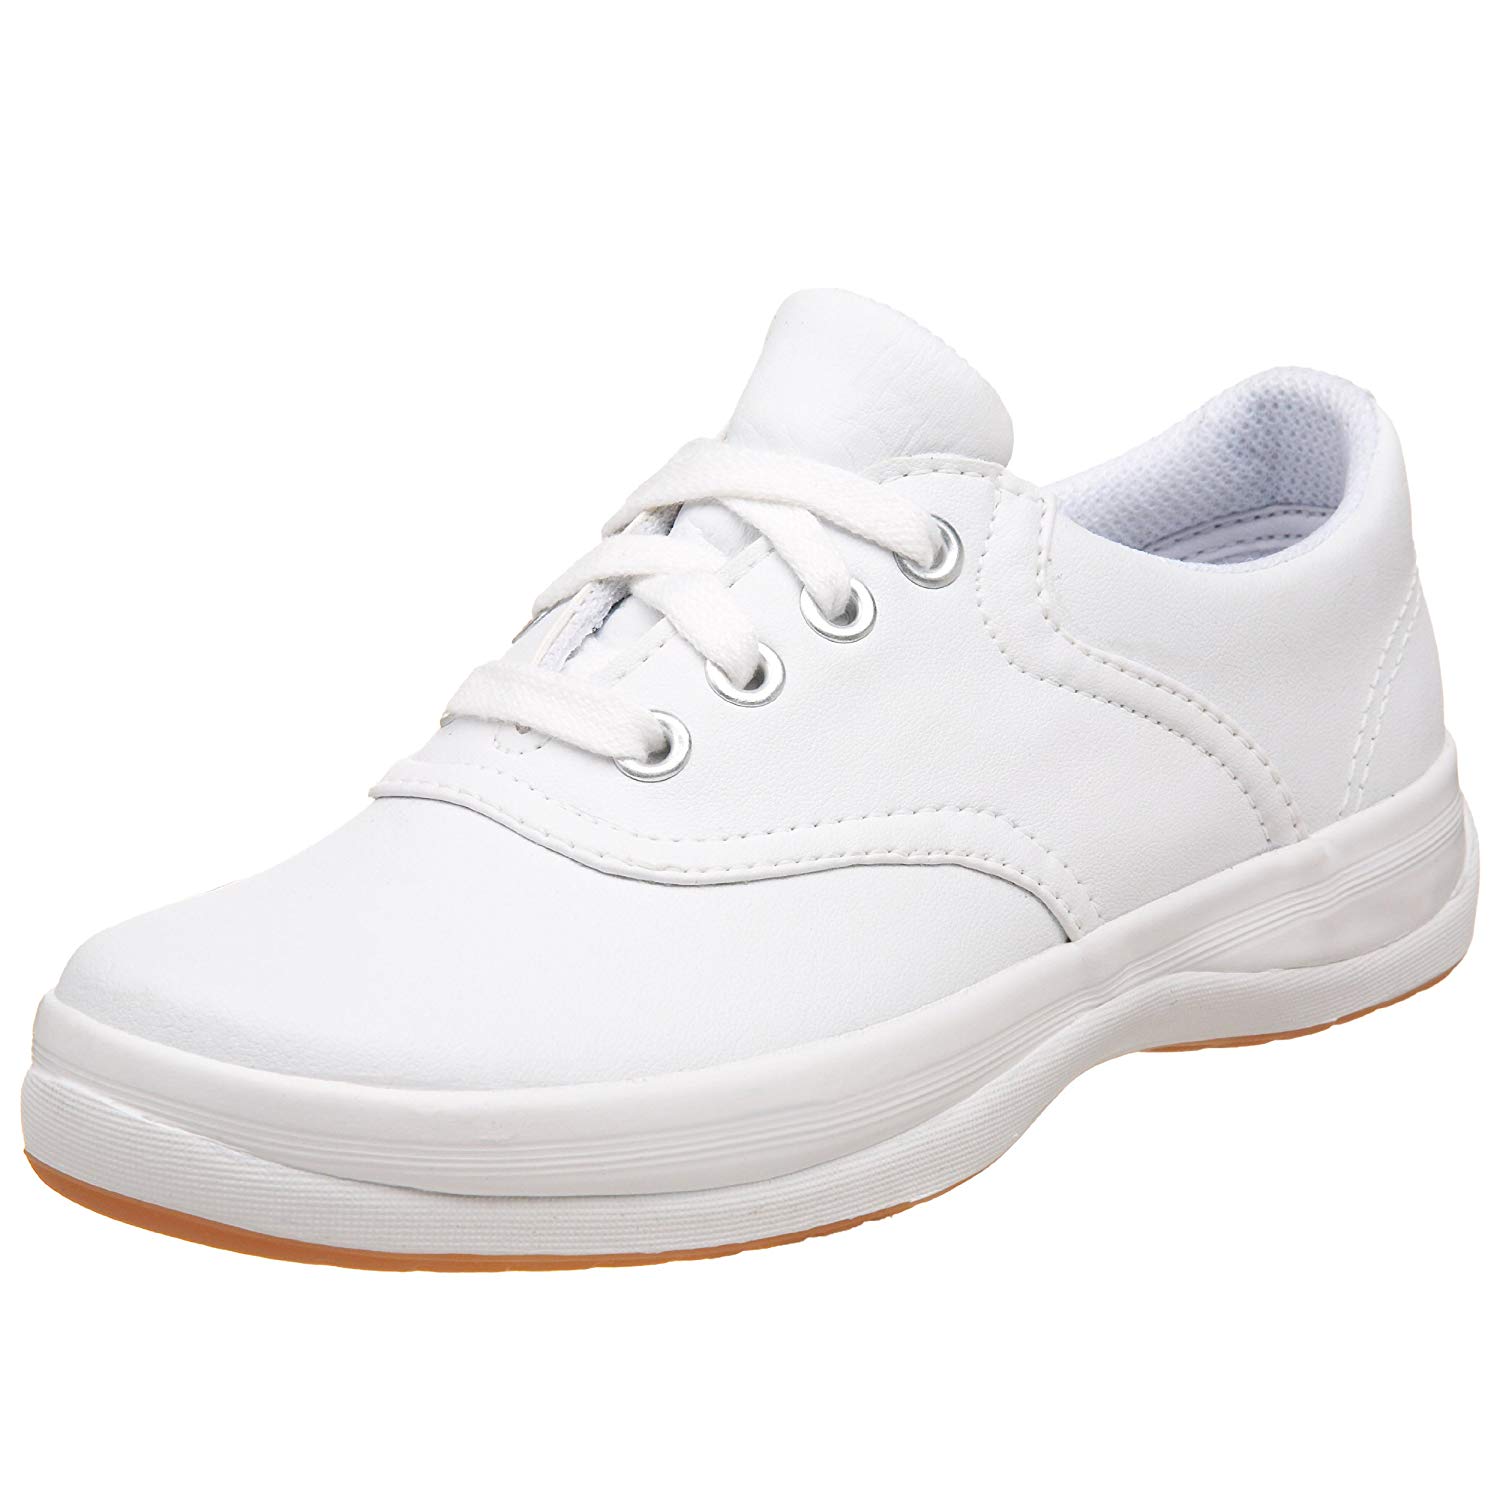 Keds Boys school days 11 Leather Low Top Lace Up, White, Size Big Kid 5 ...